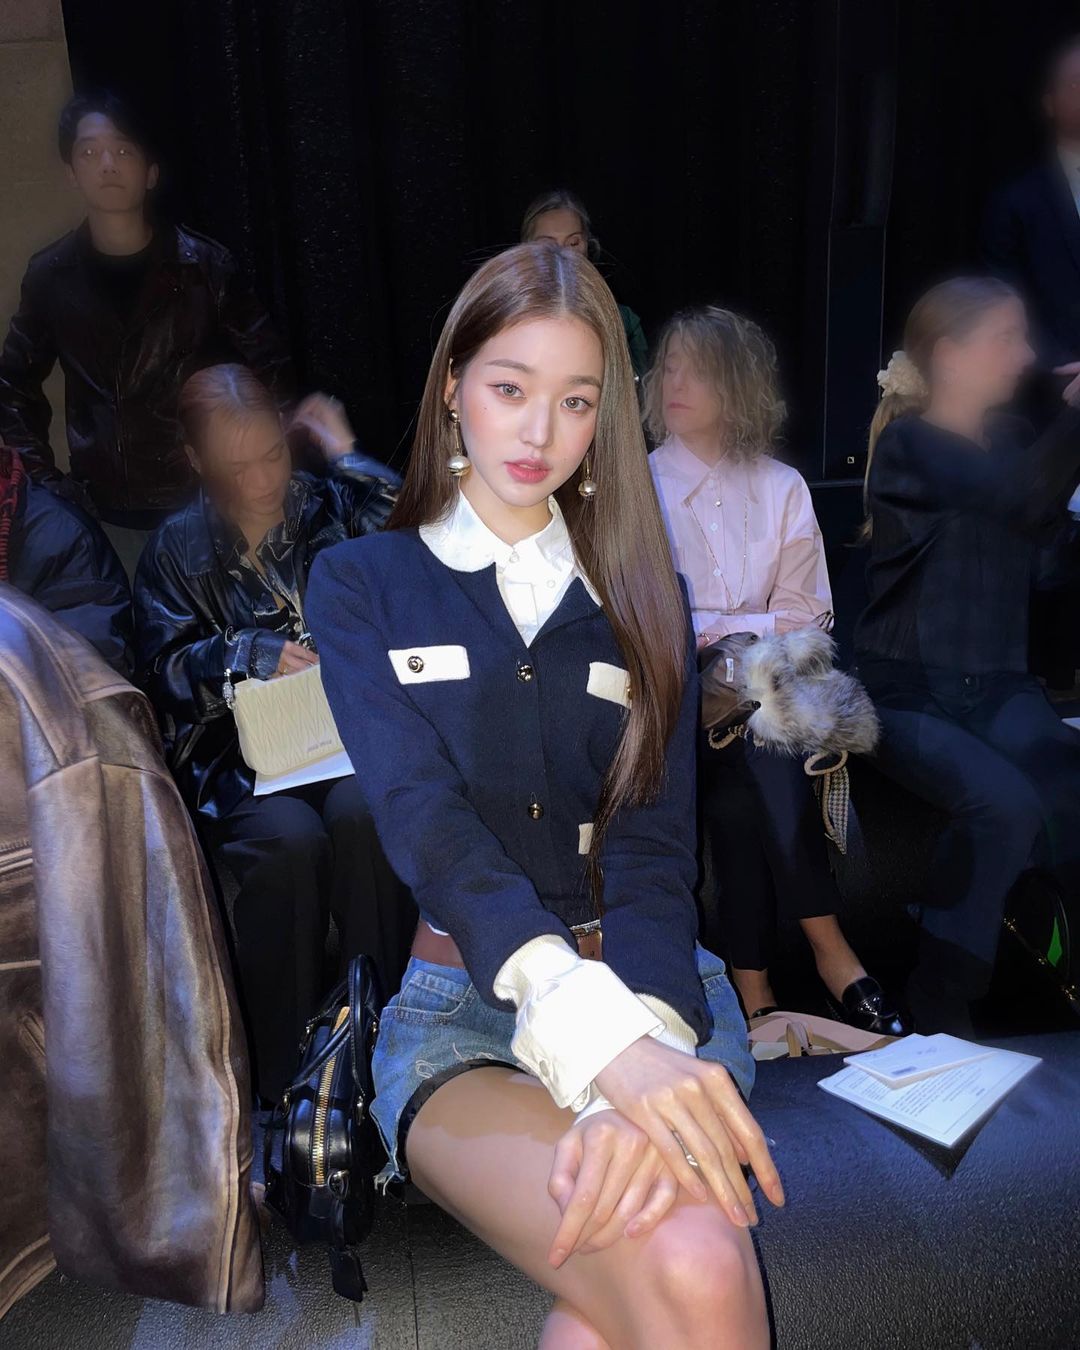 WONYOUNG GLOBAL on X: [📢] Jang Wonyoung will be attending her first  Jewelry exhibition in Paris. At events like this, brand engagements are  very important as it helps measure Wonyoung's influence as